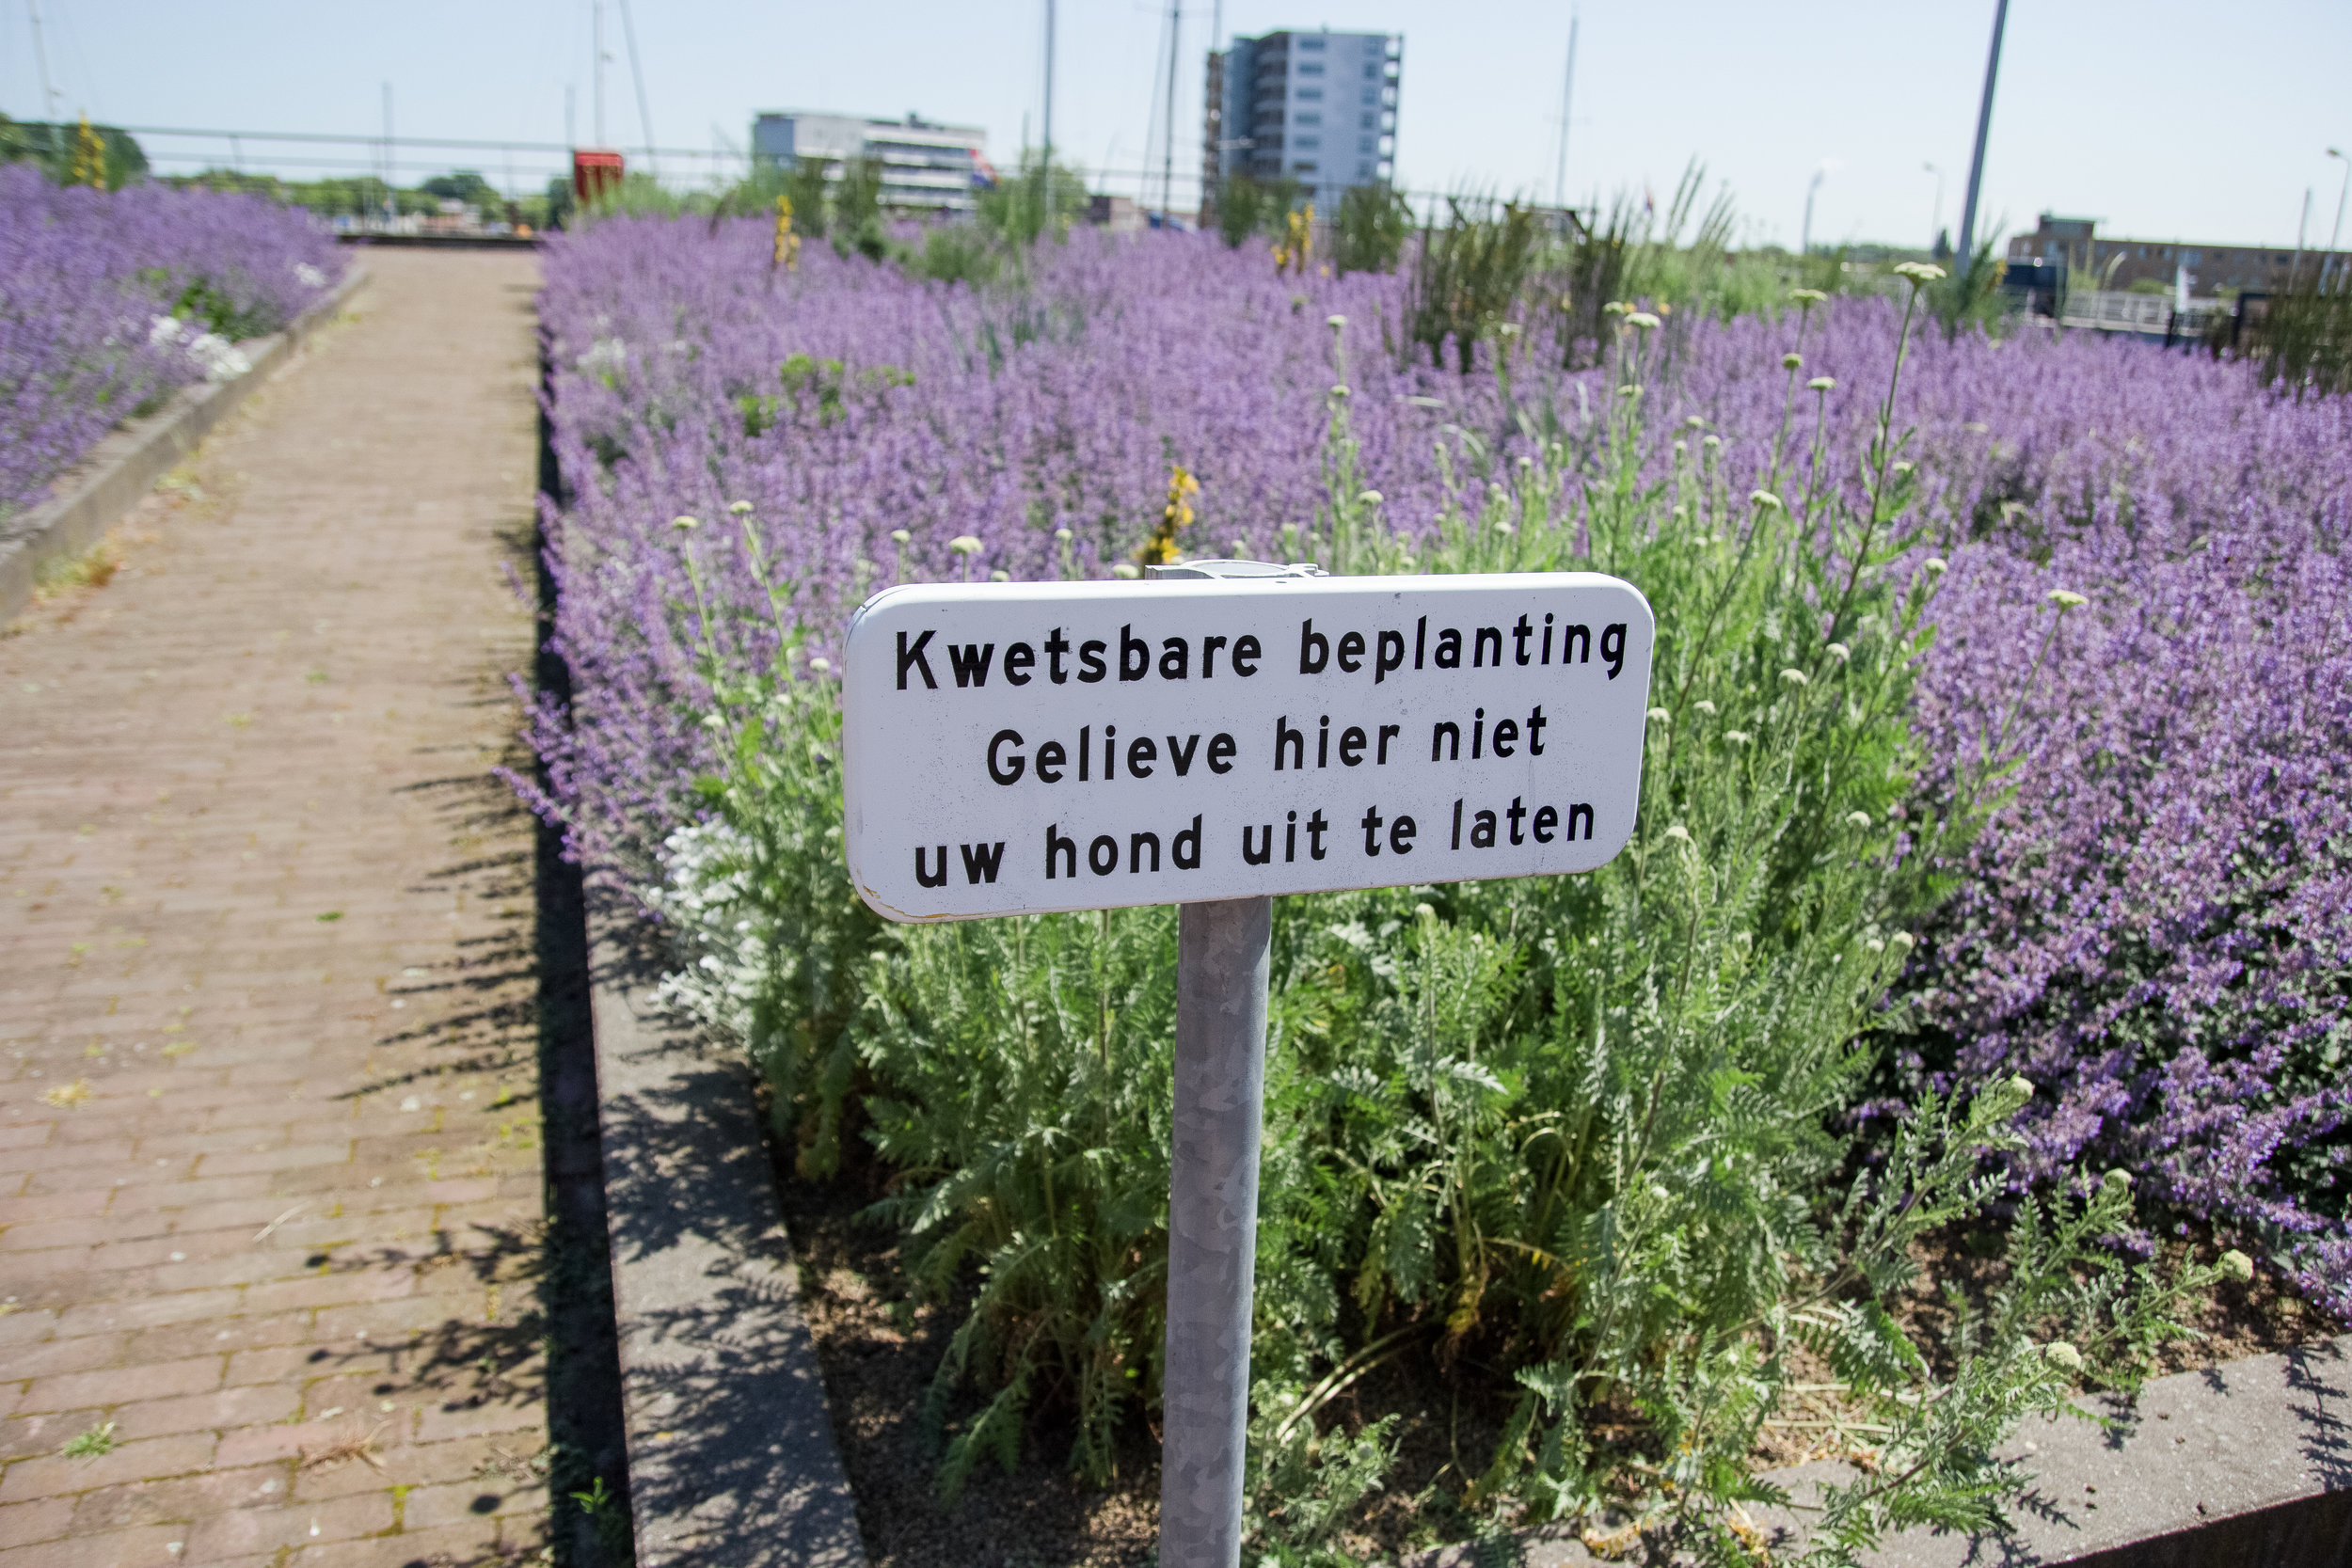  Dutch is a comical language at face value. Gefeliciteerd! Also, beplanting... bee planting. 